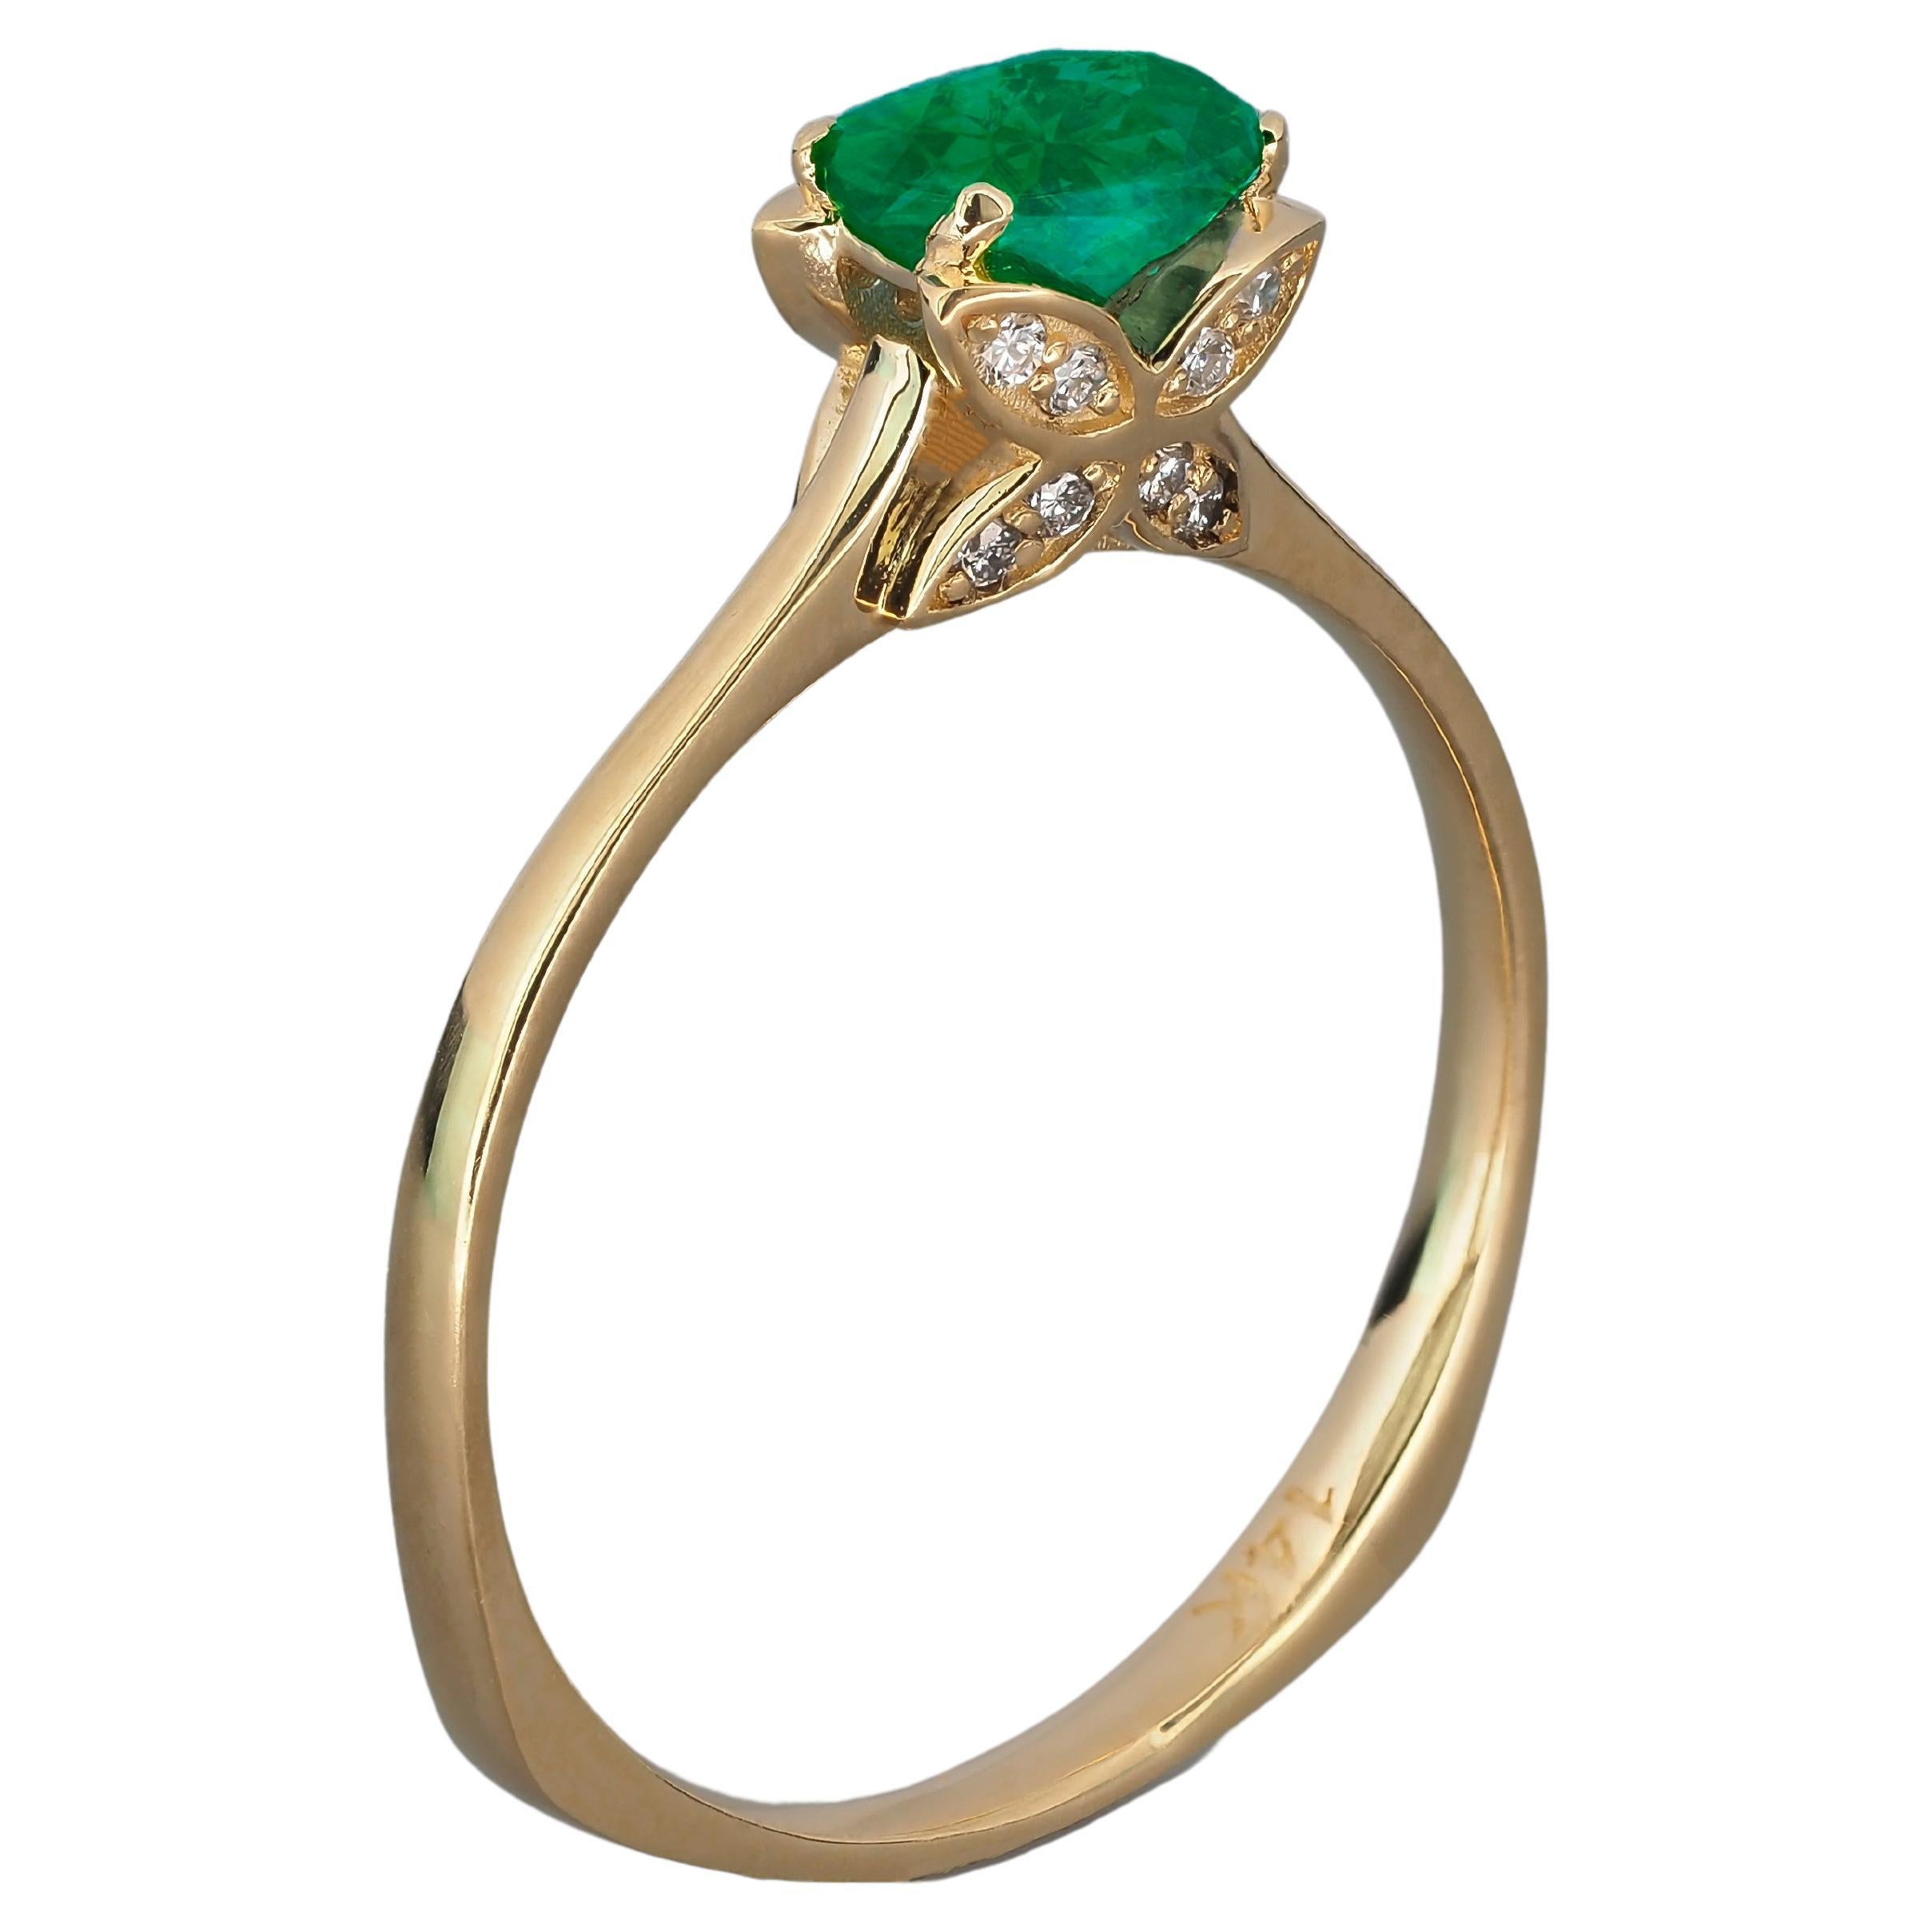 Emerald and Diamonds 14k Gold Ring, Butterfly Gold Ring